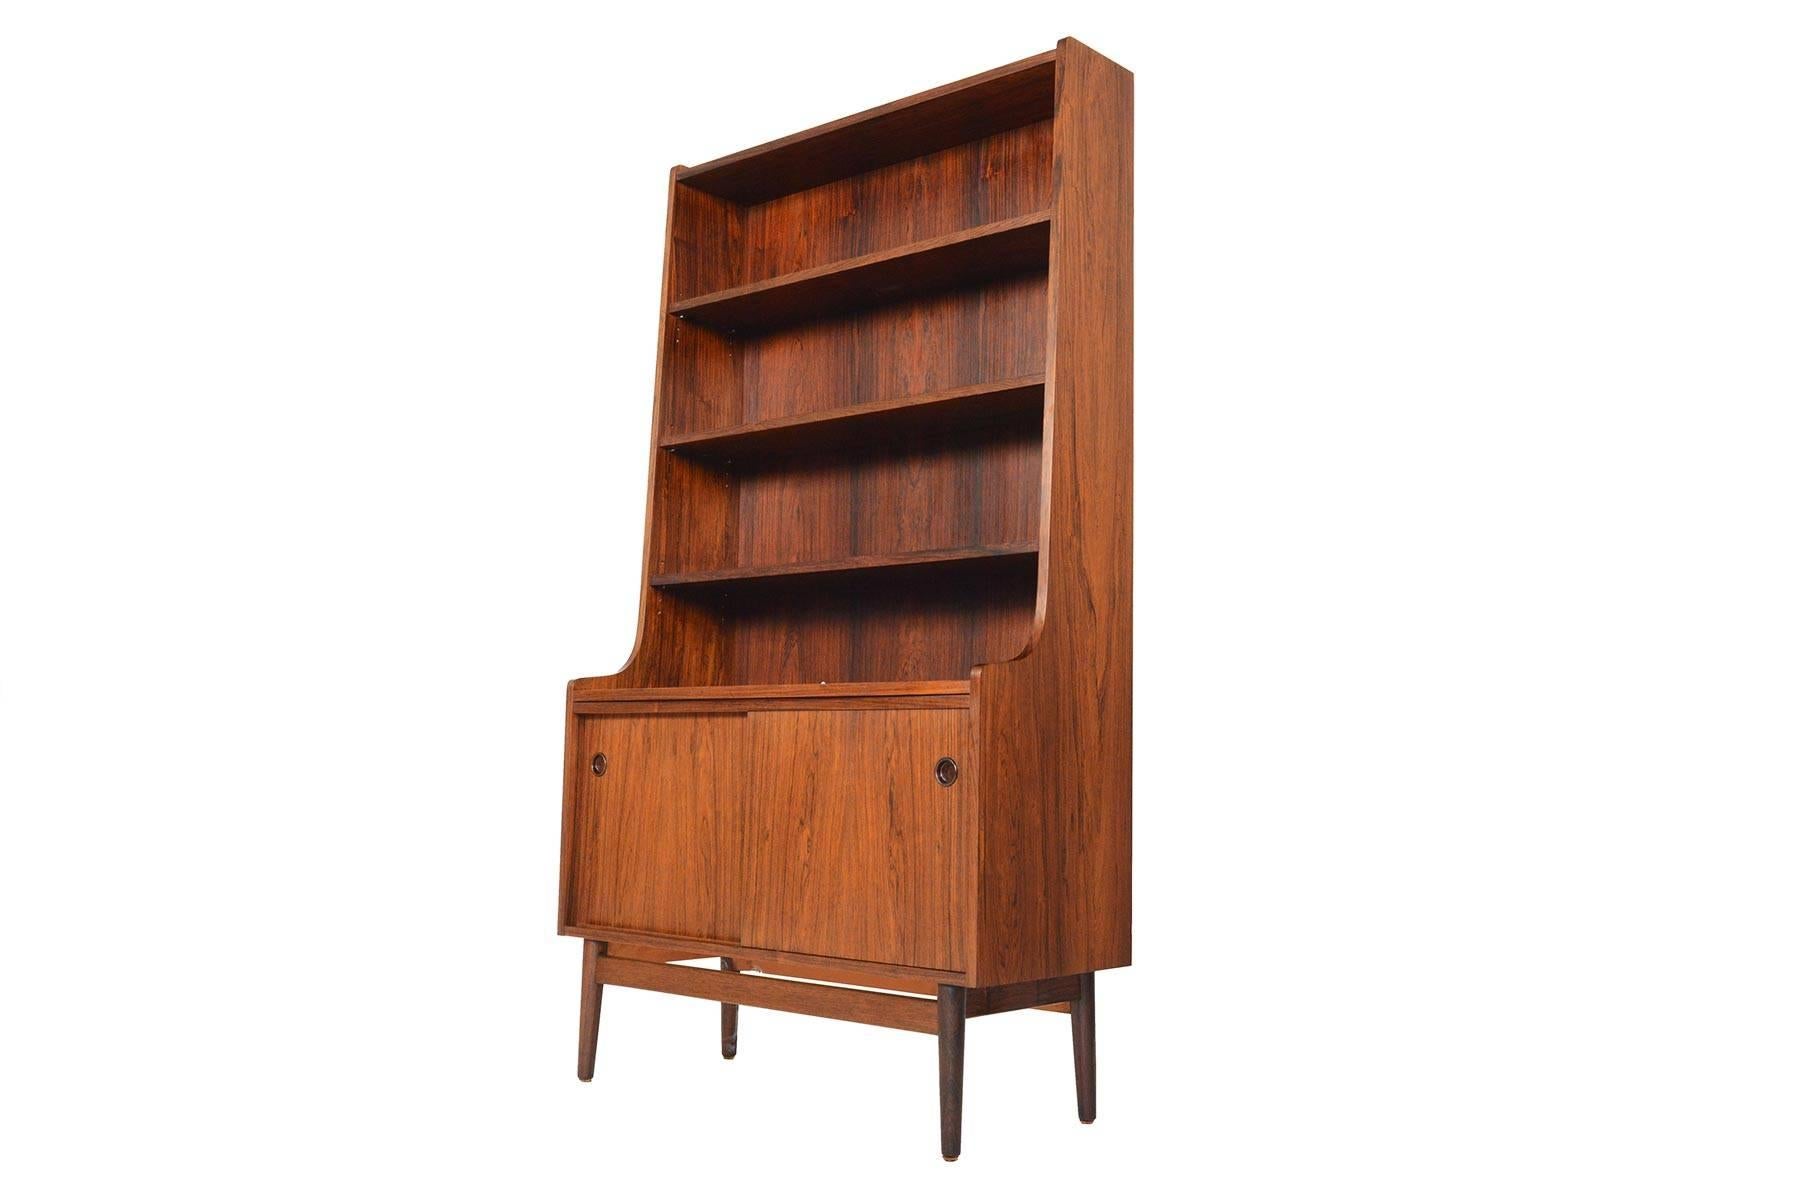 Danish Modern Midcentury Bookcase in Rosewood by Johannes Sorth #3 2